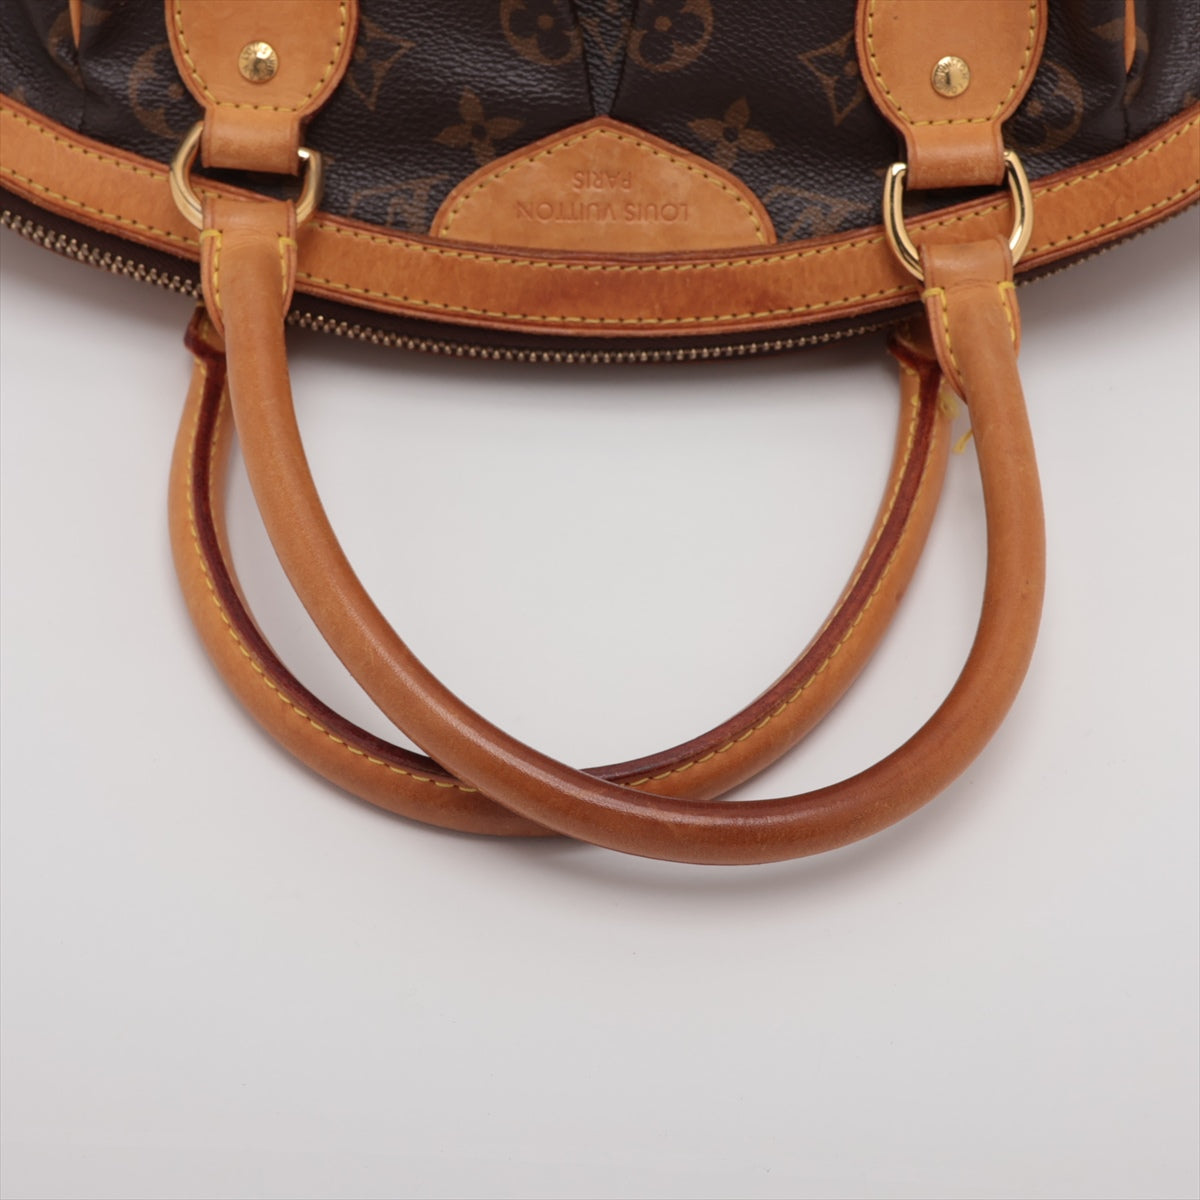 Louis Vuitton Monogram Tivoli PM M40143 Hands-on and Stened